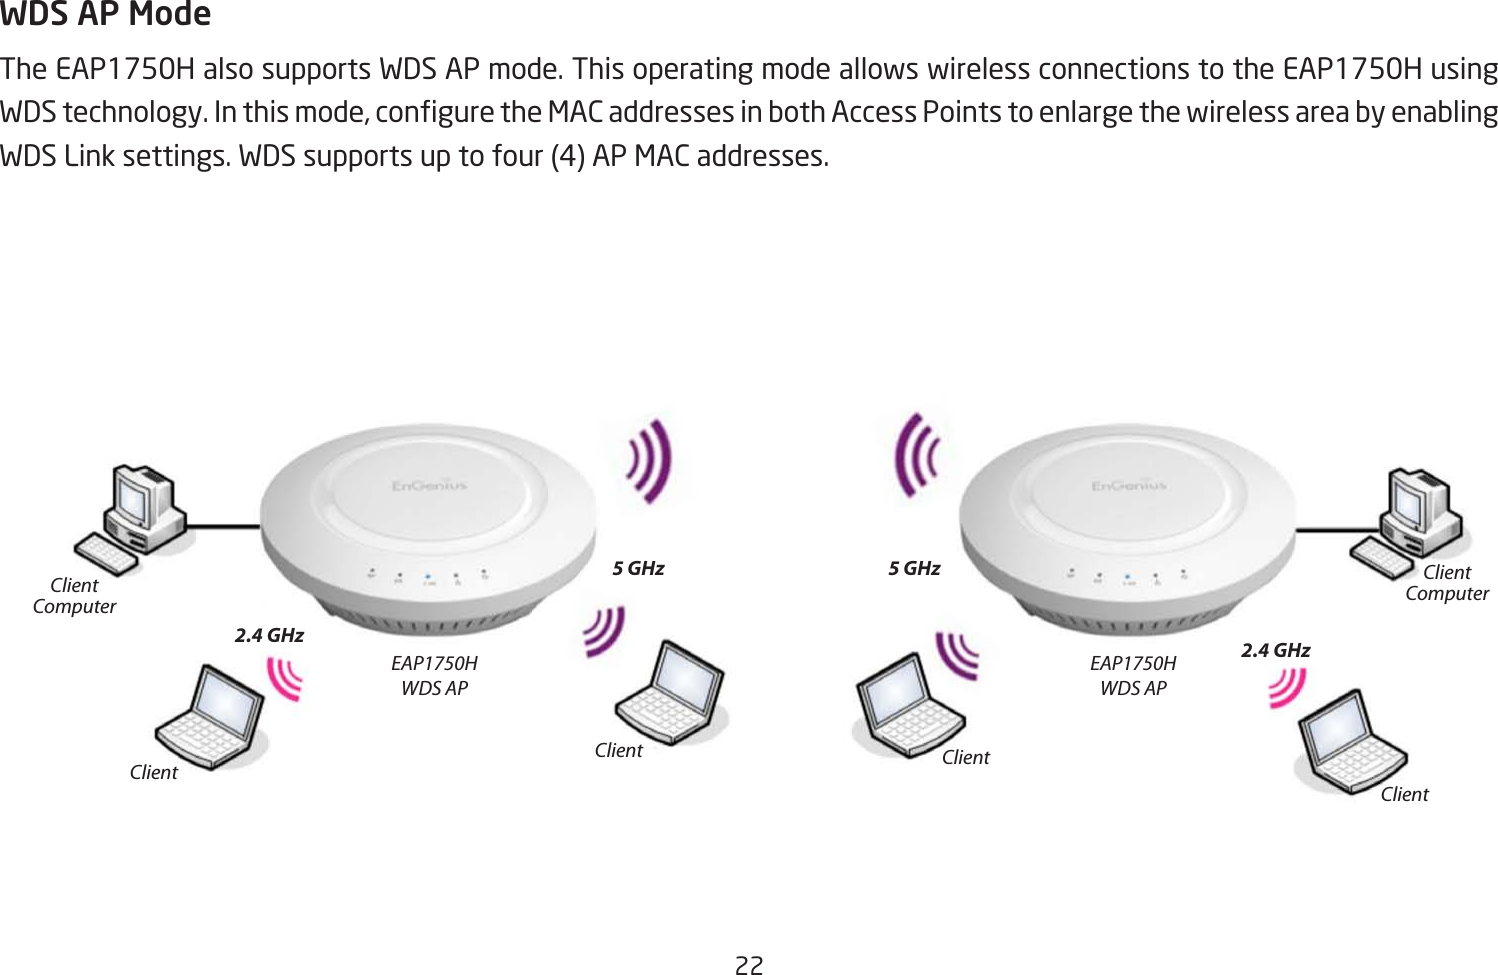 22 WDS AP ModeThe EAP1750H also supports WDS AP mode. This operating mode allows wireless connections to the EAP1750H using WDStechnology.Inthismode,conguretheMACaddressesinbothAccessPointstoenlargethewirelessareabyenablingWDS Link settings. WDS supports up to four (4) AP MAC addresses.EAP1750HWDS APEAP1750HWDS AP2.4 GHz 2.4 GHz5 GHz 5 GHzClientClient ClientClientClientComputerClientComputer